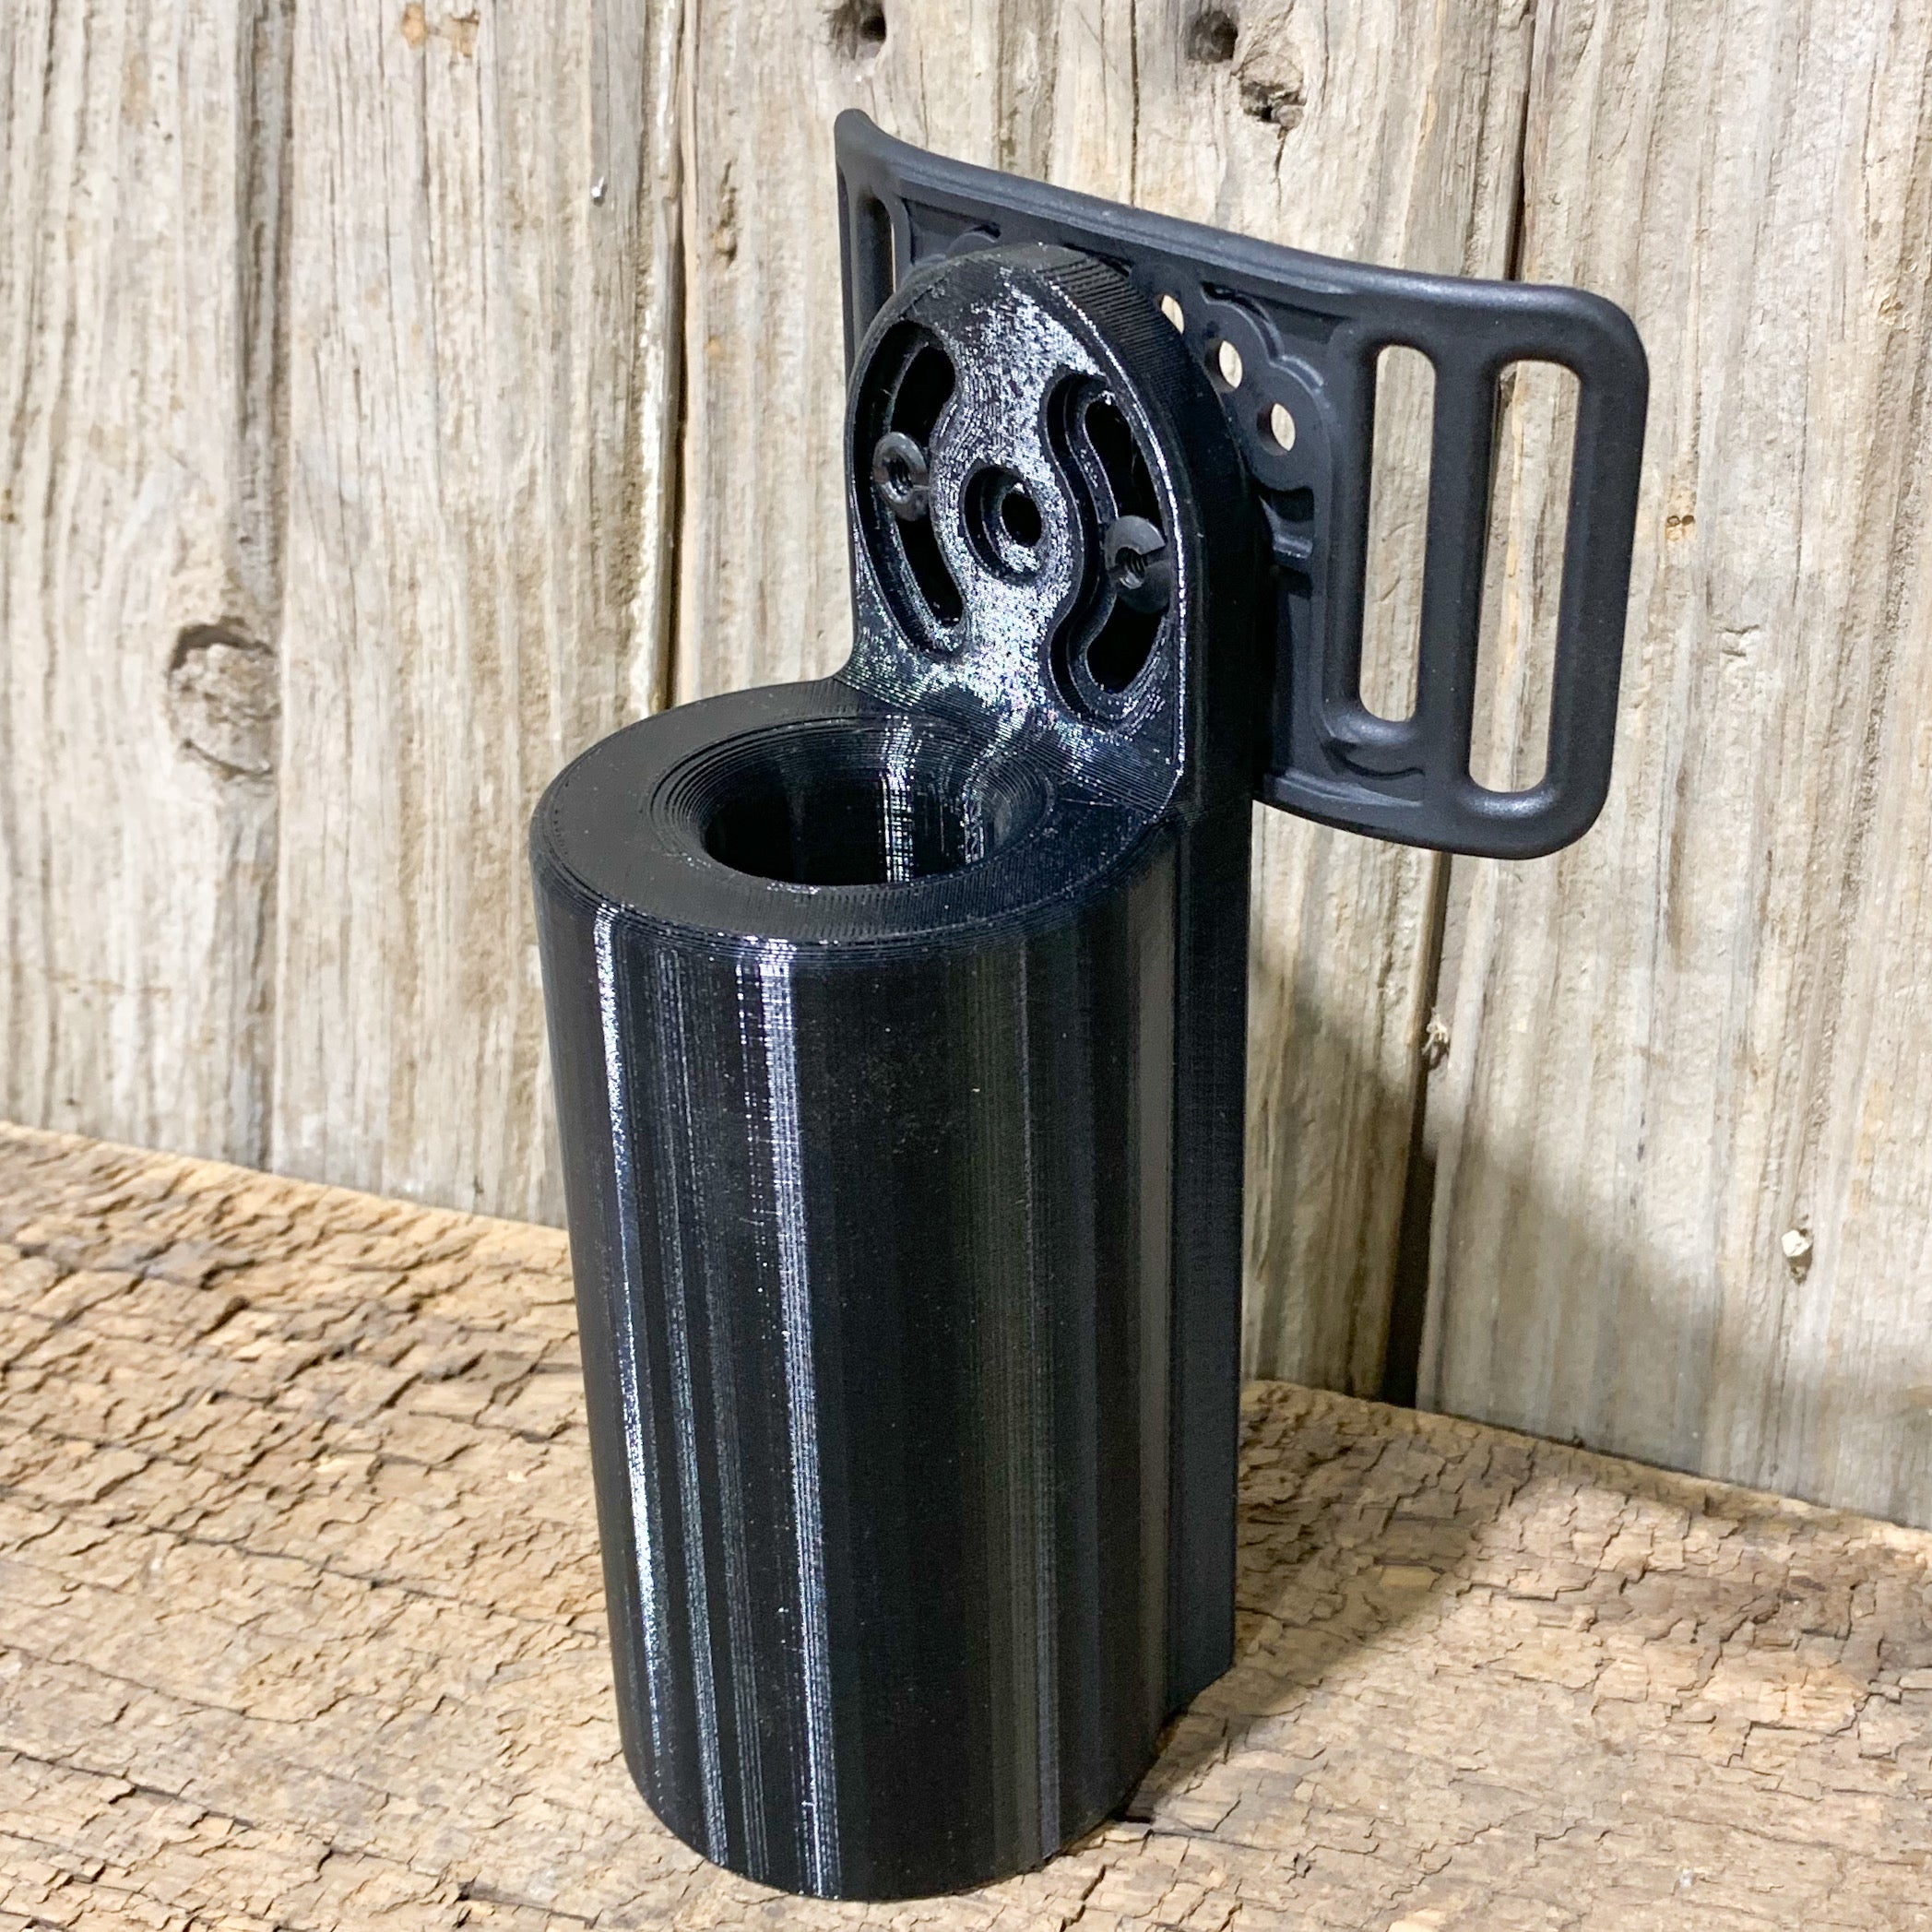 Our 3D-printed Fishing Pole Holster is designed to fit our favorite Crappie Fishing rods from ACC Crappie Stix. The Rod Holder is perfect for that "third hand" when you need to bait the hook, change lures, tie the line, or get that pesky swallowed hook out. This is a must-have for anyone who likes to fish!